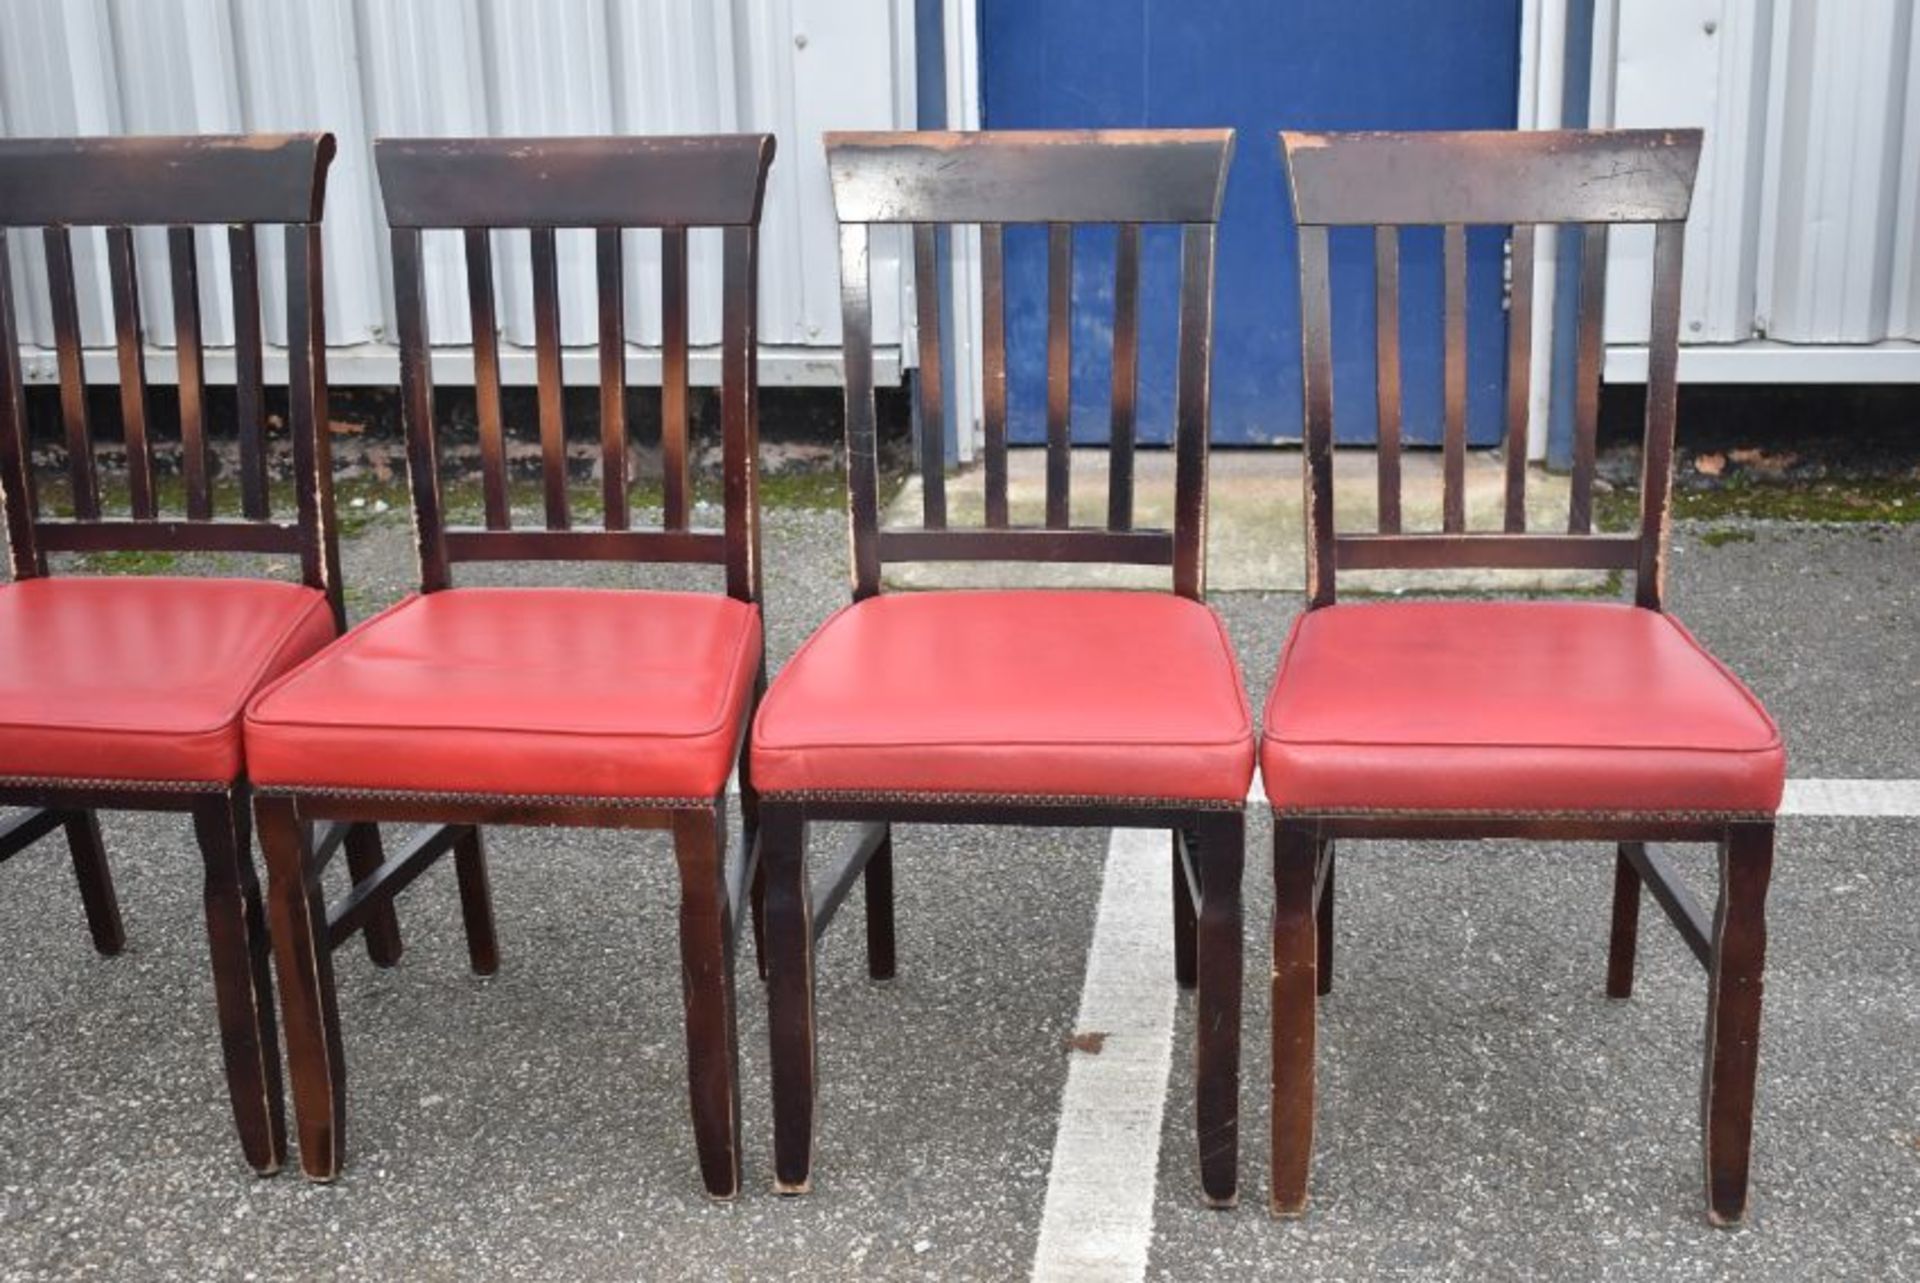 8 x Restaurant Dining Chairs With Dark Stained Wood Finish and Red Leather Seat Pads - Recently - Image 6 of 7